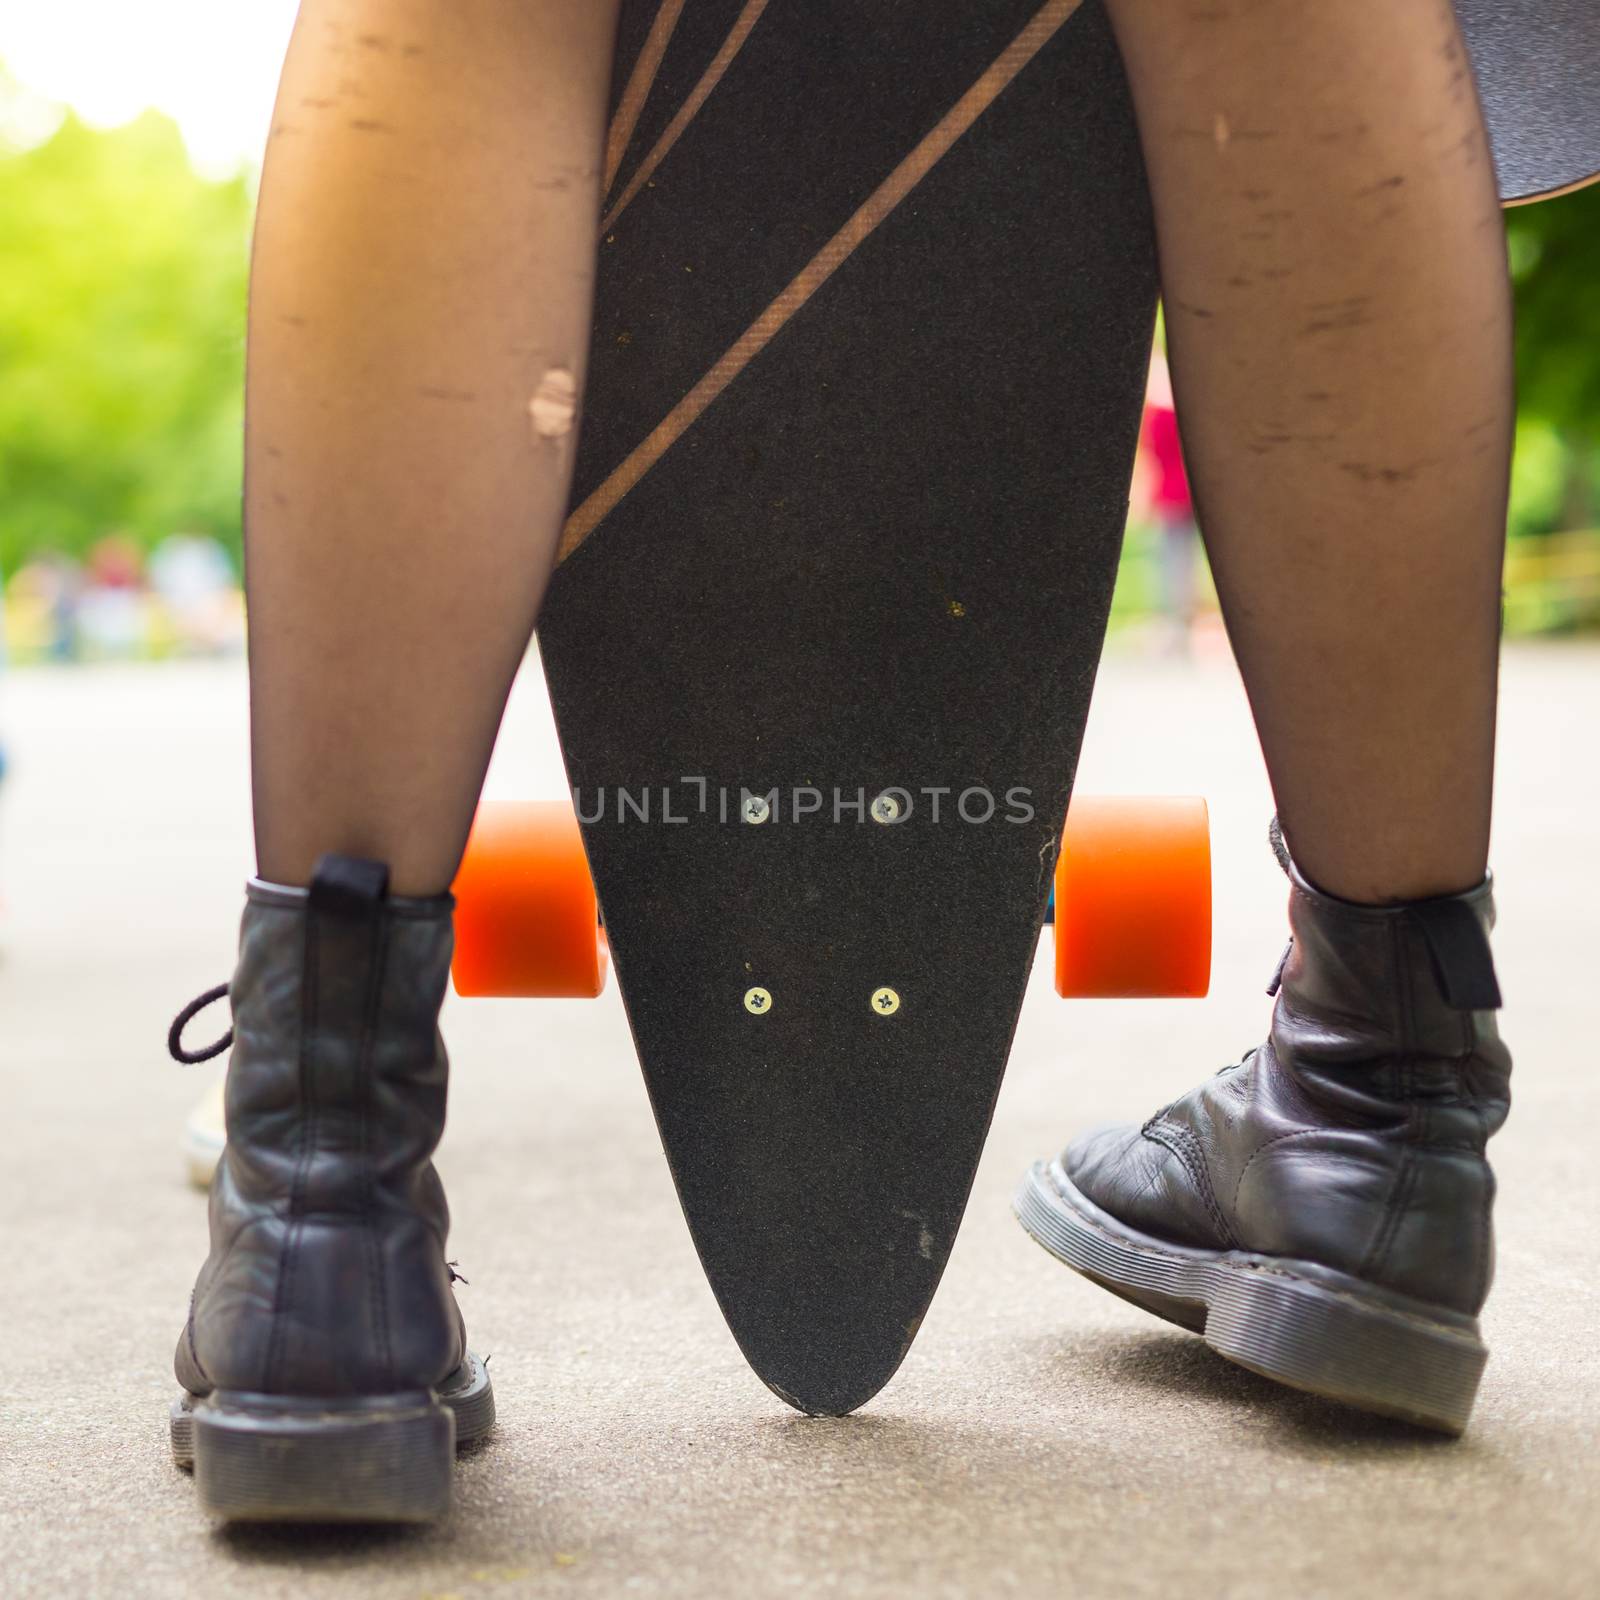 Teenagers practicing long board riding outdoors in skateboarding park. Detail of  legs of girl wearing black boots and stockings holding long board in foreground. Active urban life. Urban subculture.